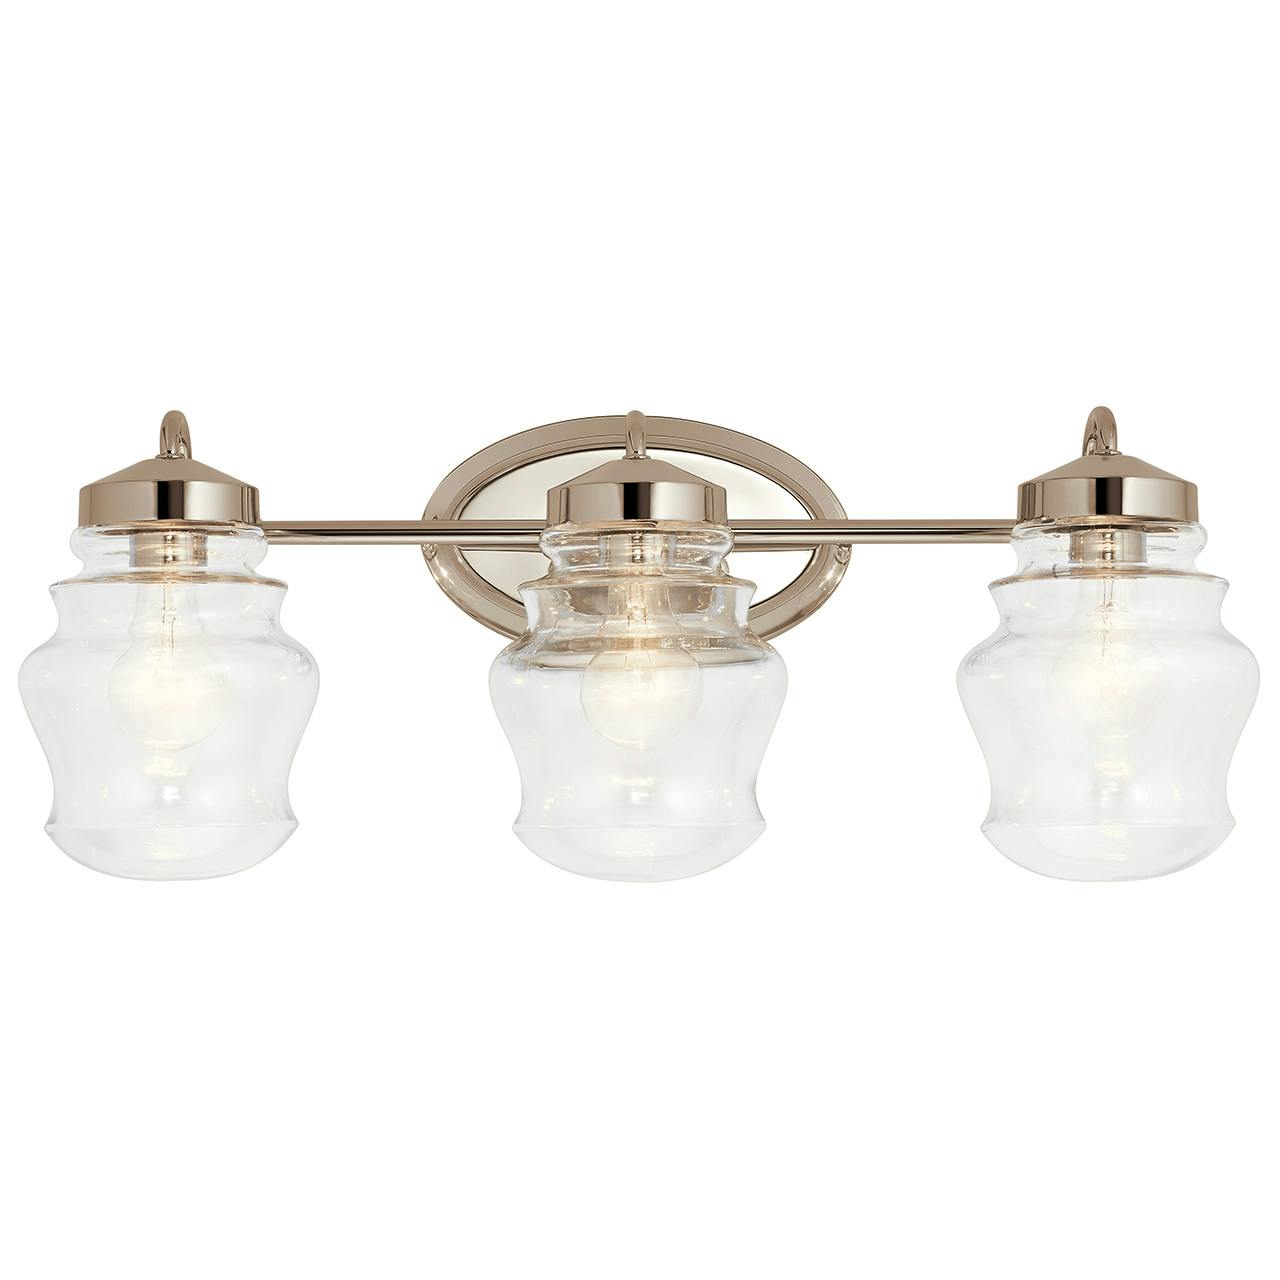 The Janiel 3 Light Vanity Light Nickel facing down on a white background